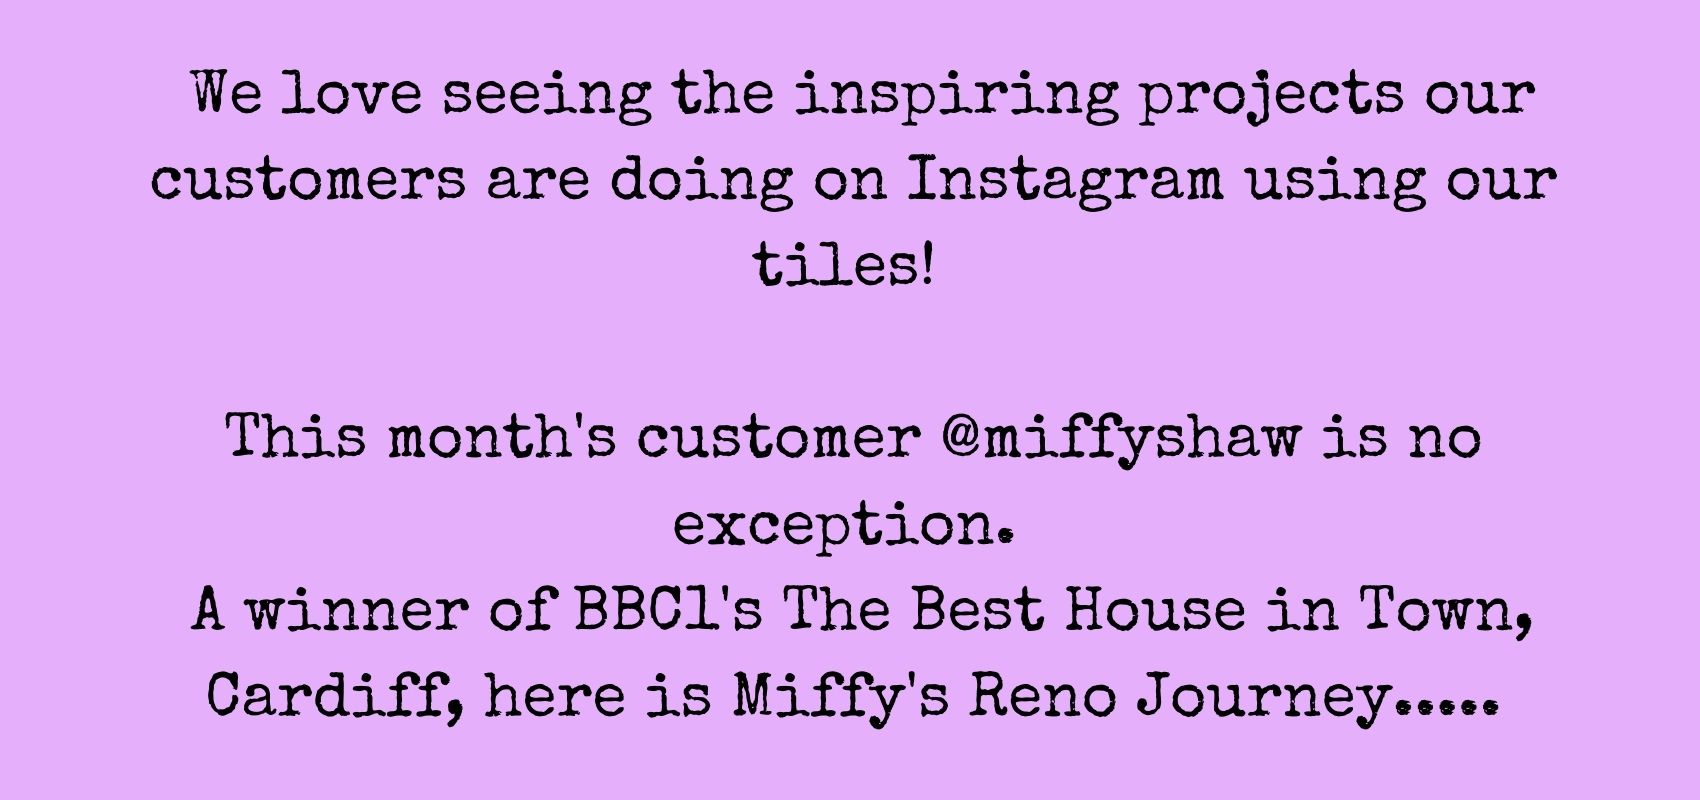 We love seeing the inspiring projects that our customers are doing on Instagram using our tiles! This month's customer @miffyshaw is no exception! A winner of BBC's 'The Best House in Town, Cardiff', here is Miffy's Reno Journey...